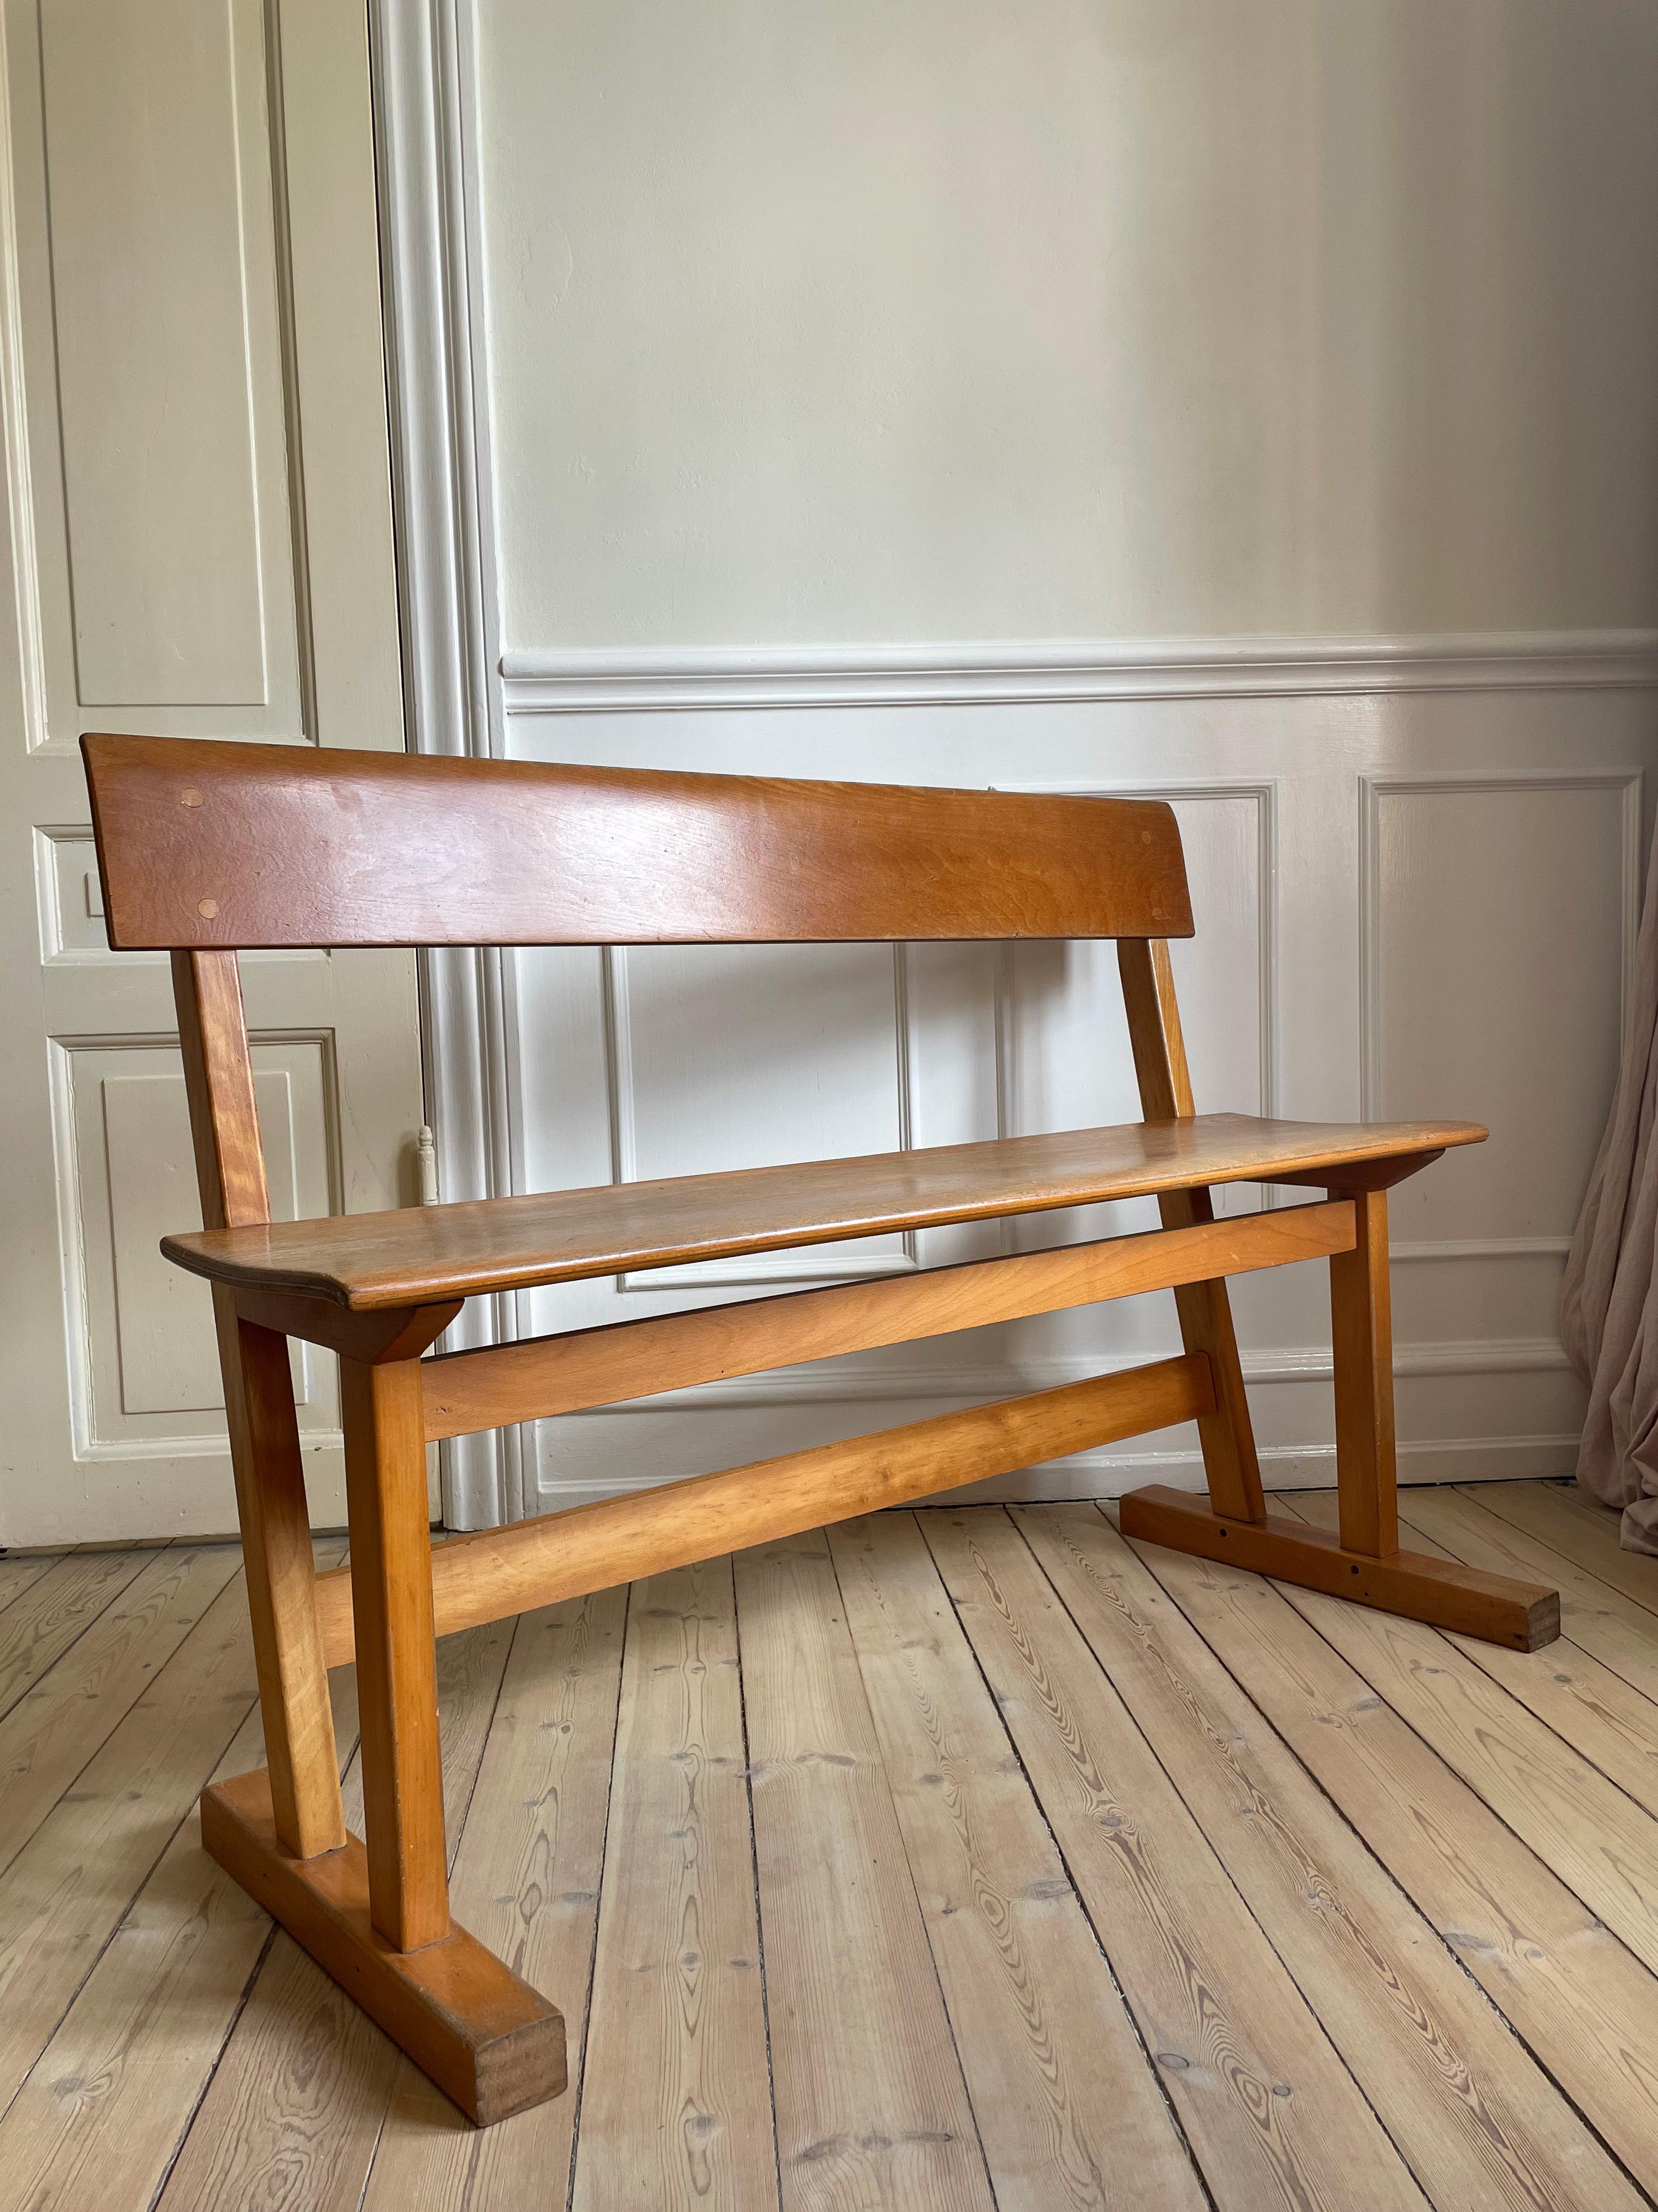 Danish Modern Hand-Crafted Wooden Bench, 1950s For Sale 15